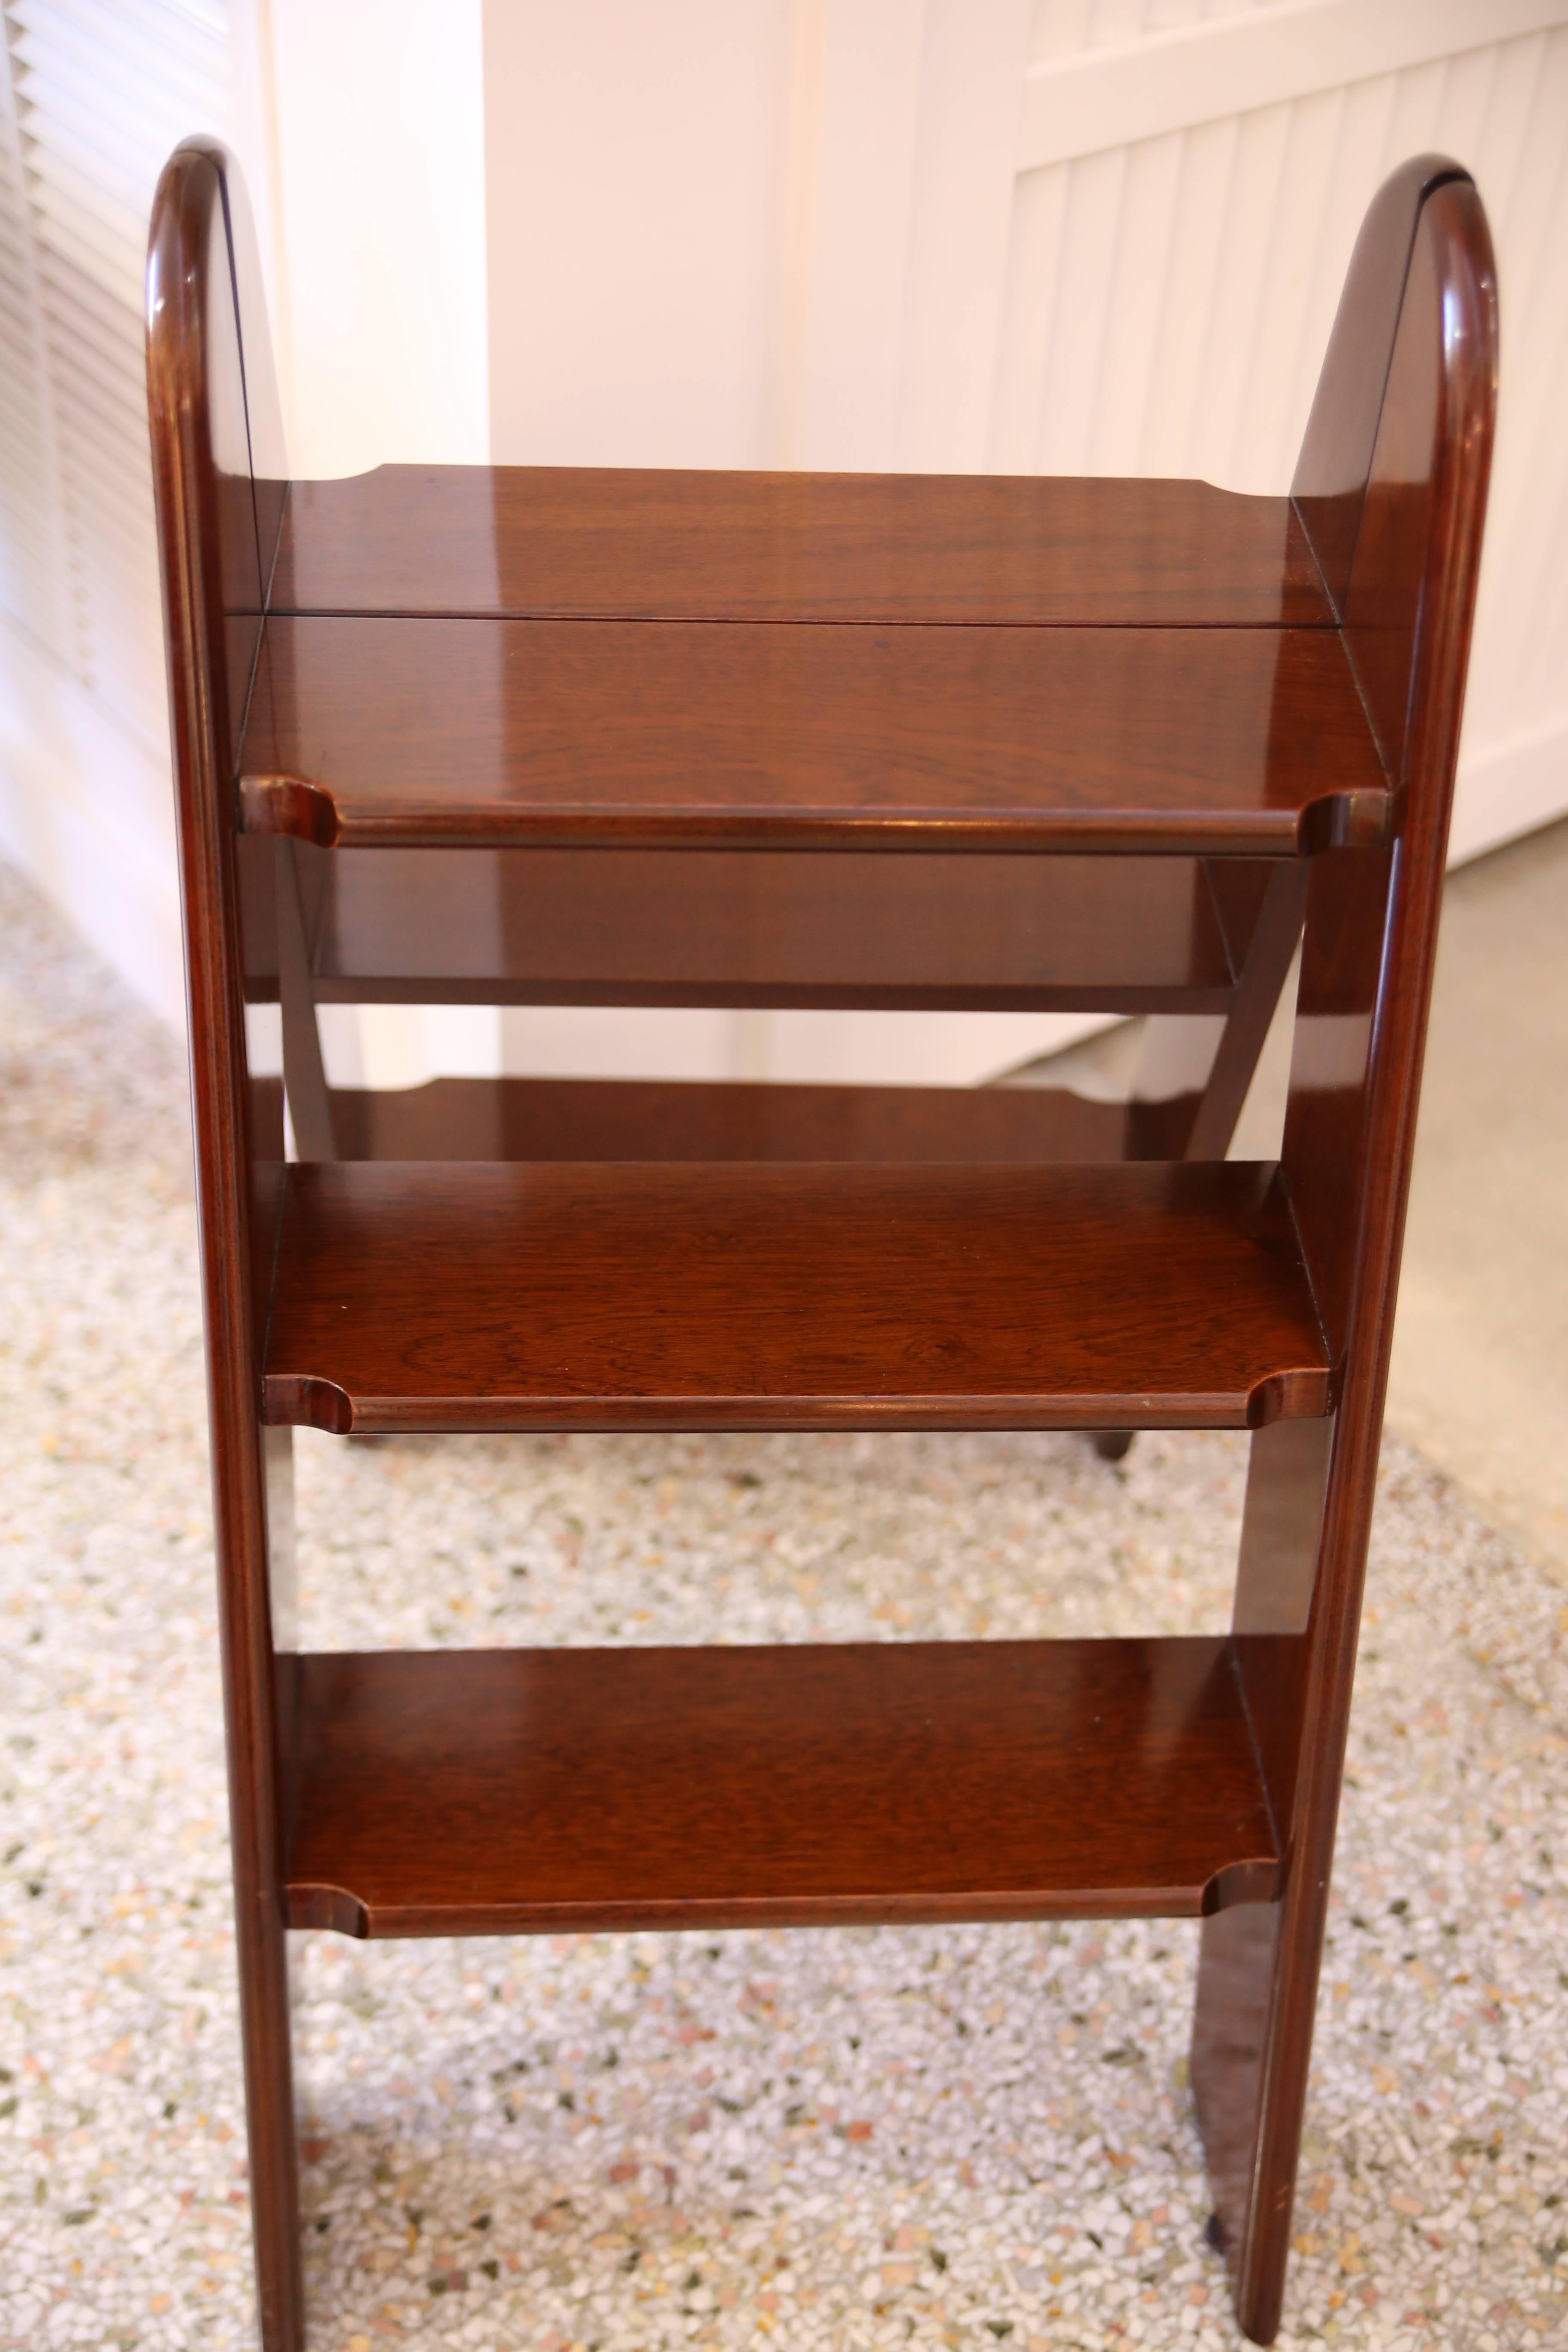 This stylish piece will make for the perfect side table or as an accent piece in your library. With its polished dark mahogany wood frame accented with brass the piece is clean-lined and handsome.